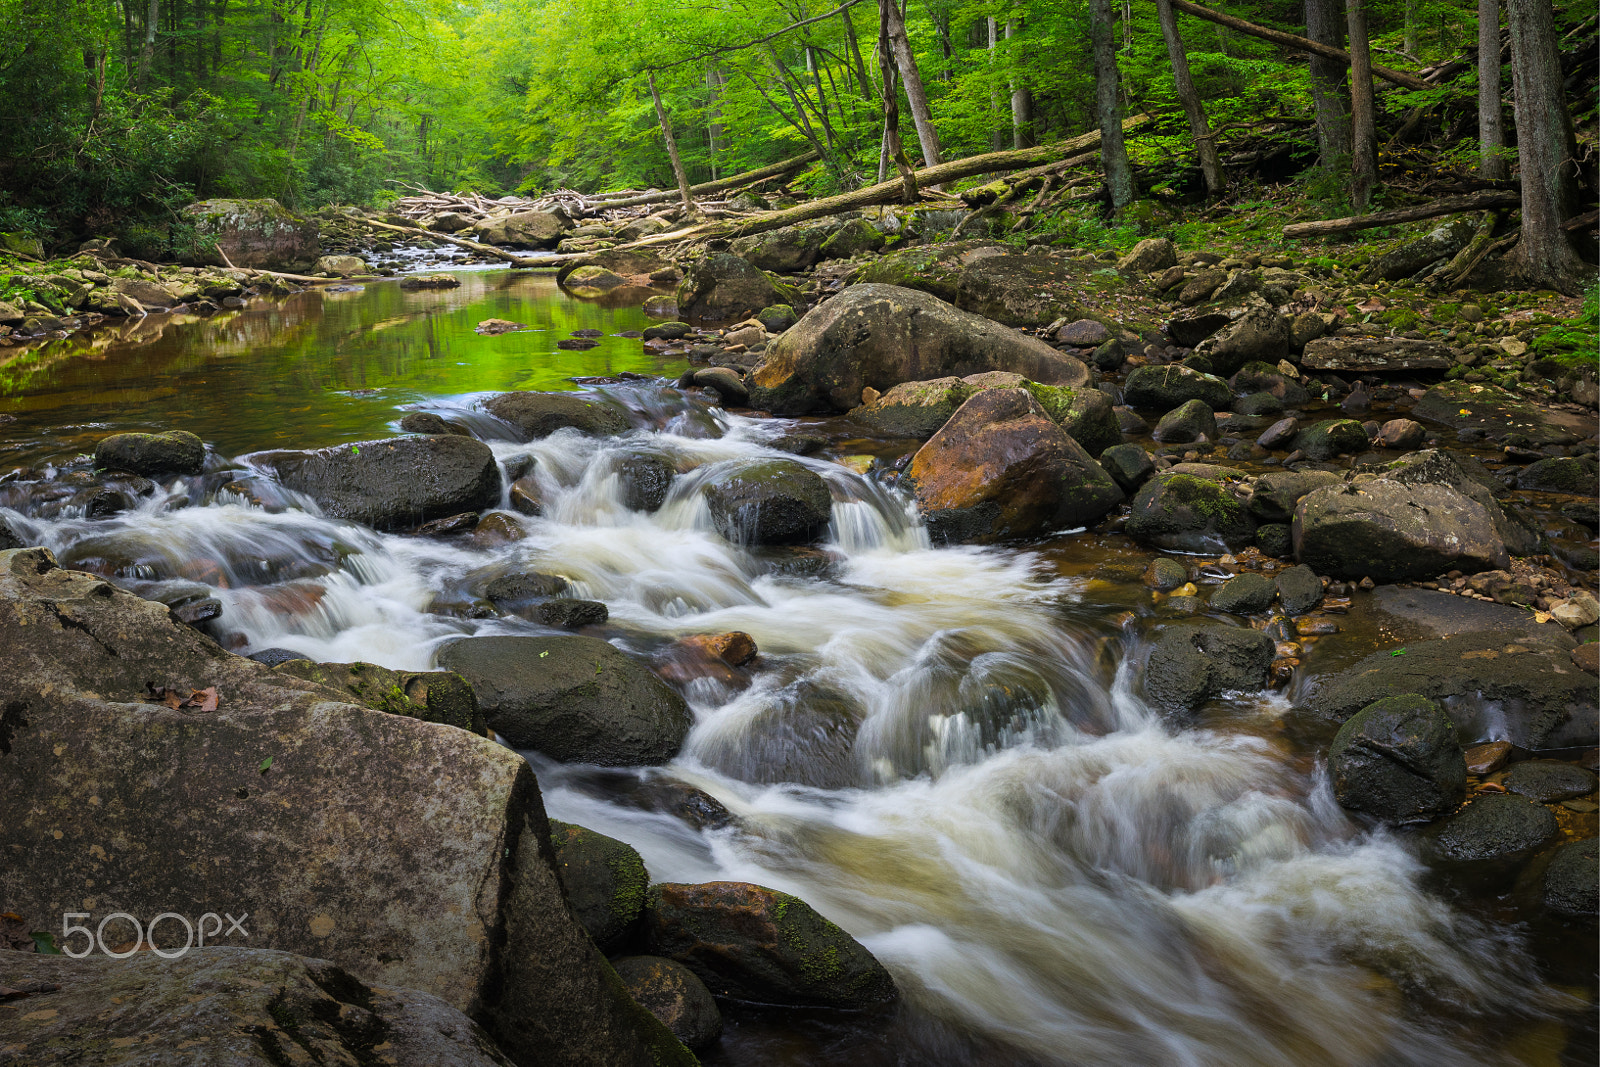 Pentax K-3 II sample photo. Cascades in the otter creek photography